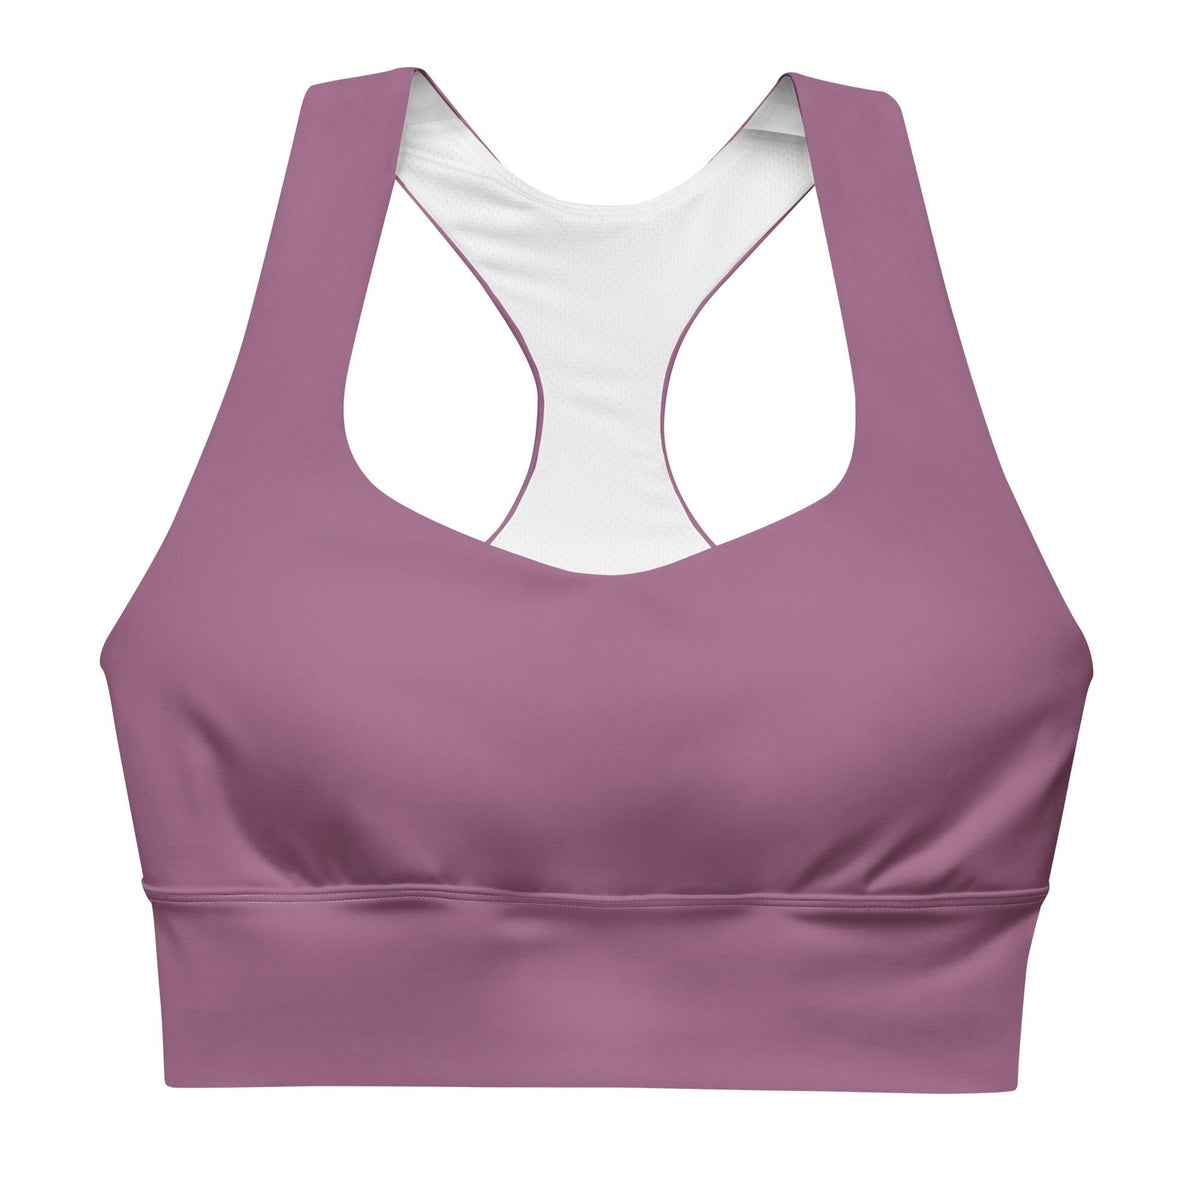 Amai Violet Longline Sports Bra - Double Layered Padded Solid - Women's Activewear Sports Top